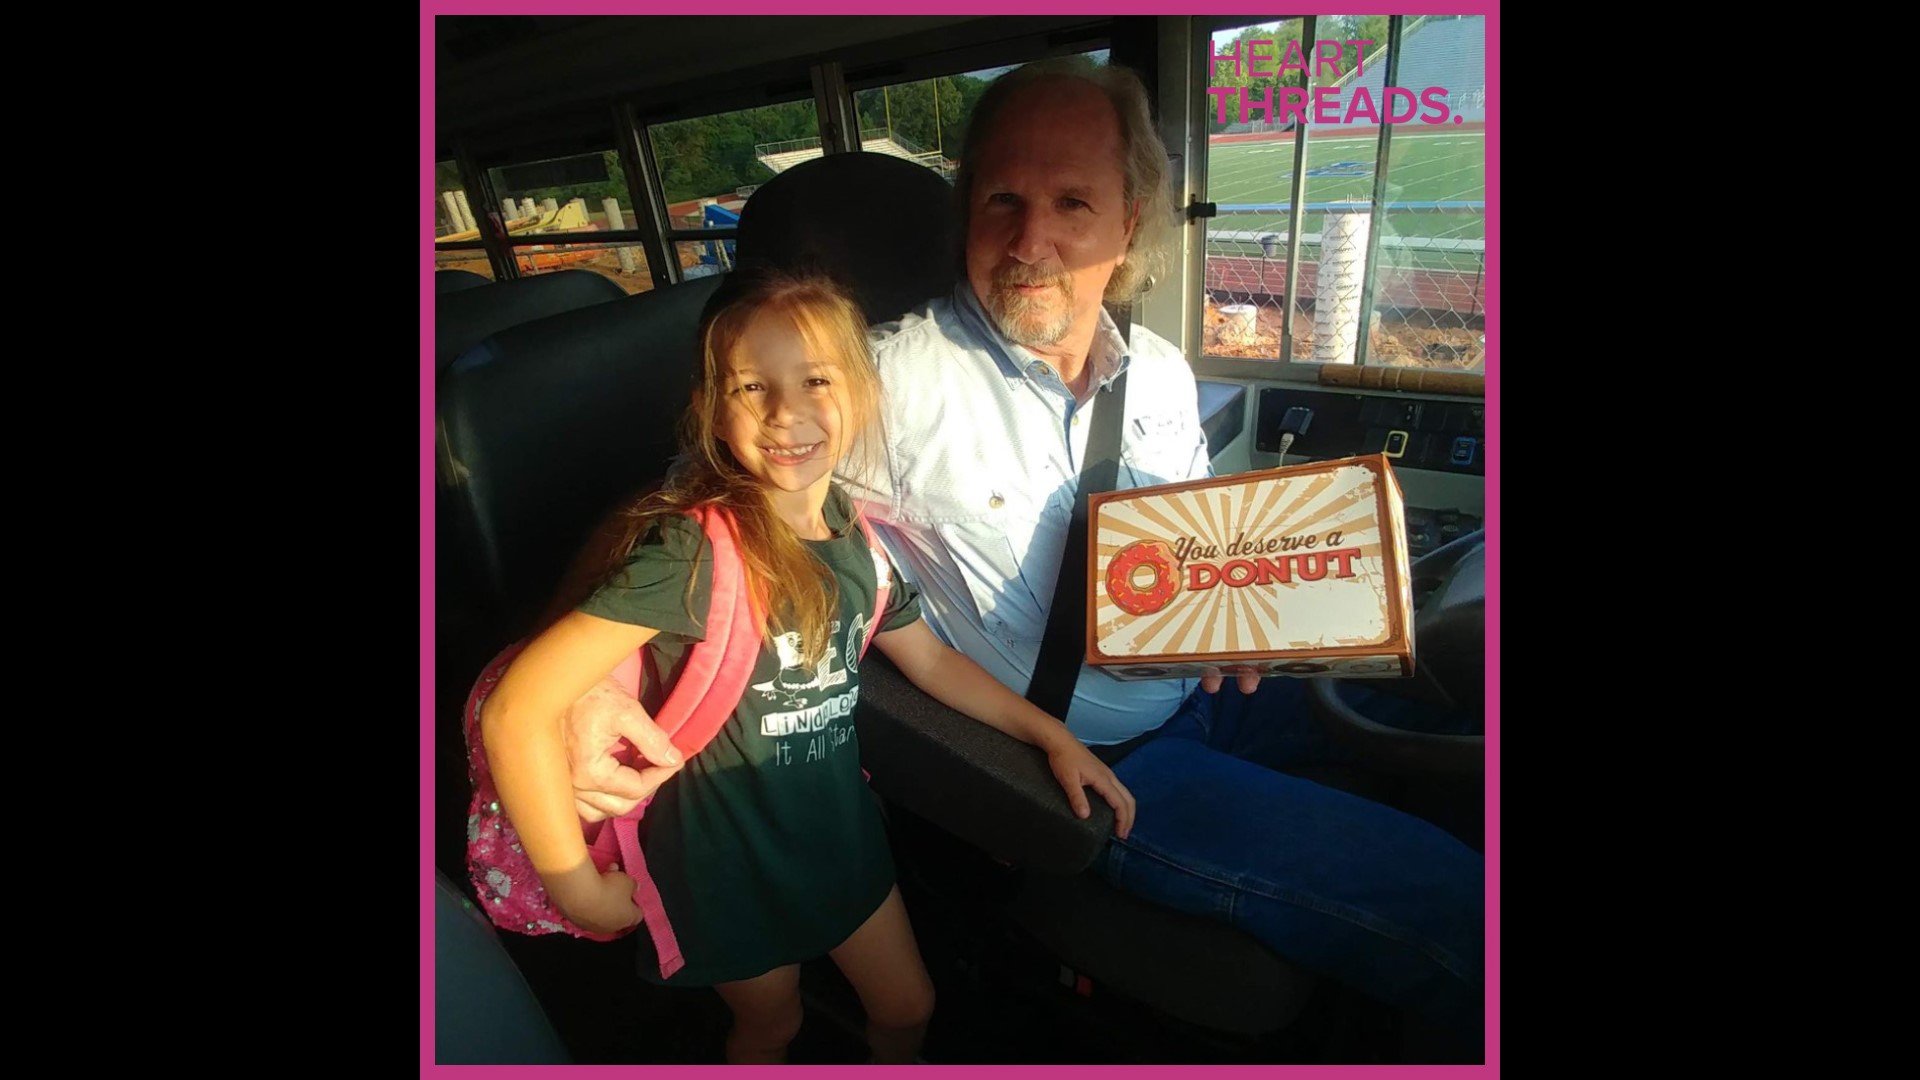 Kindergartener Kadence was preparing for a spelling test when she got some help from Mr. D the school bus driver.